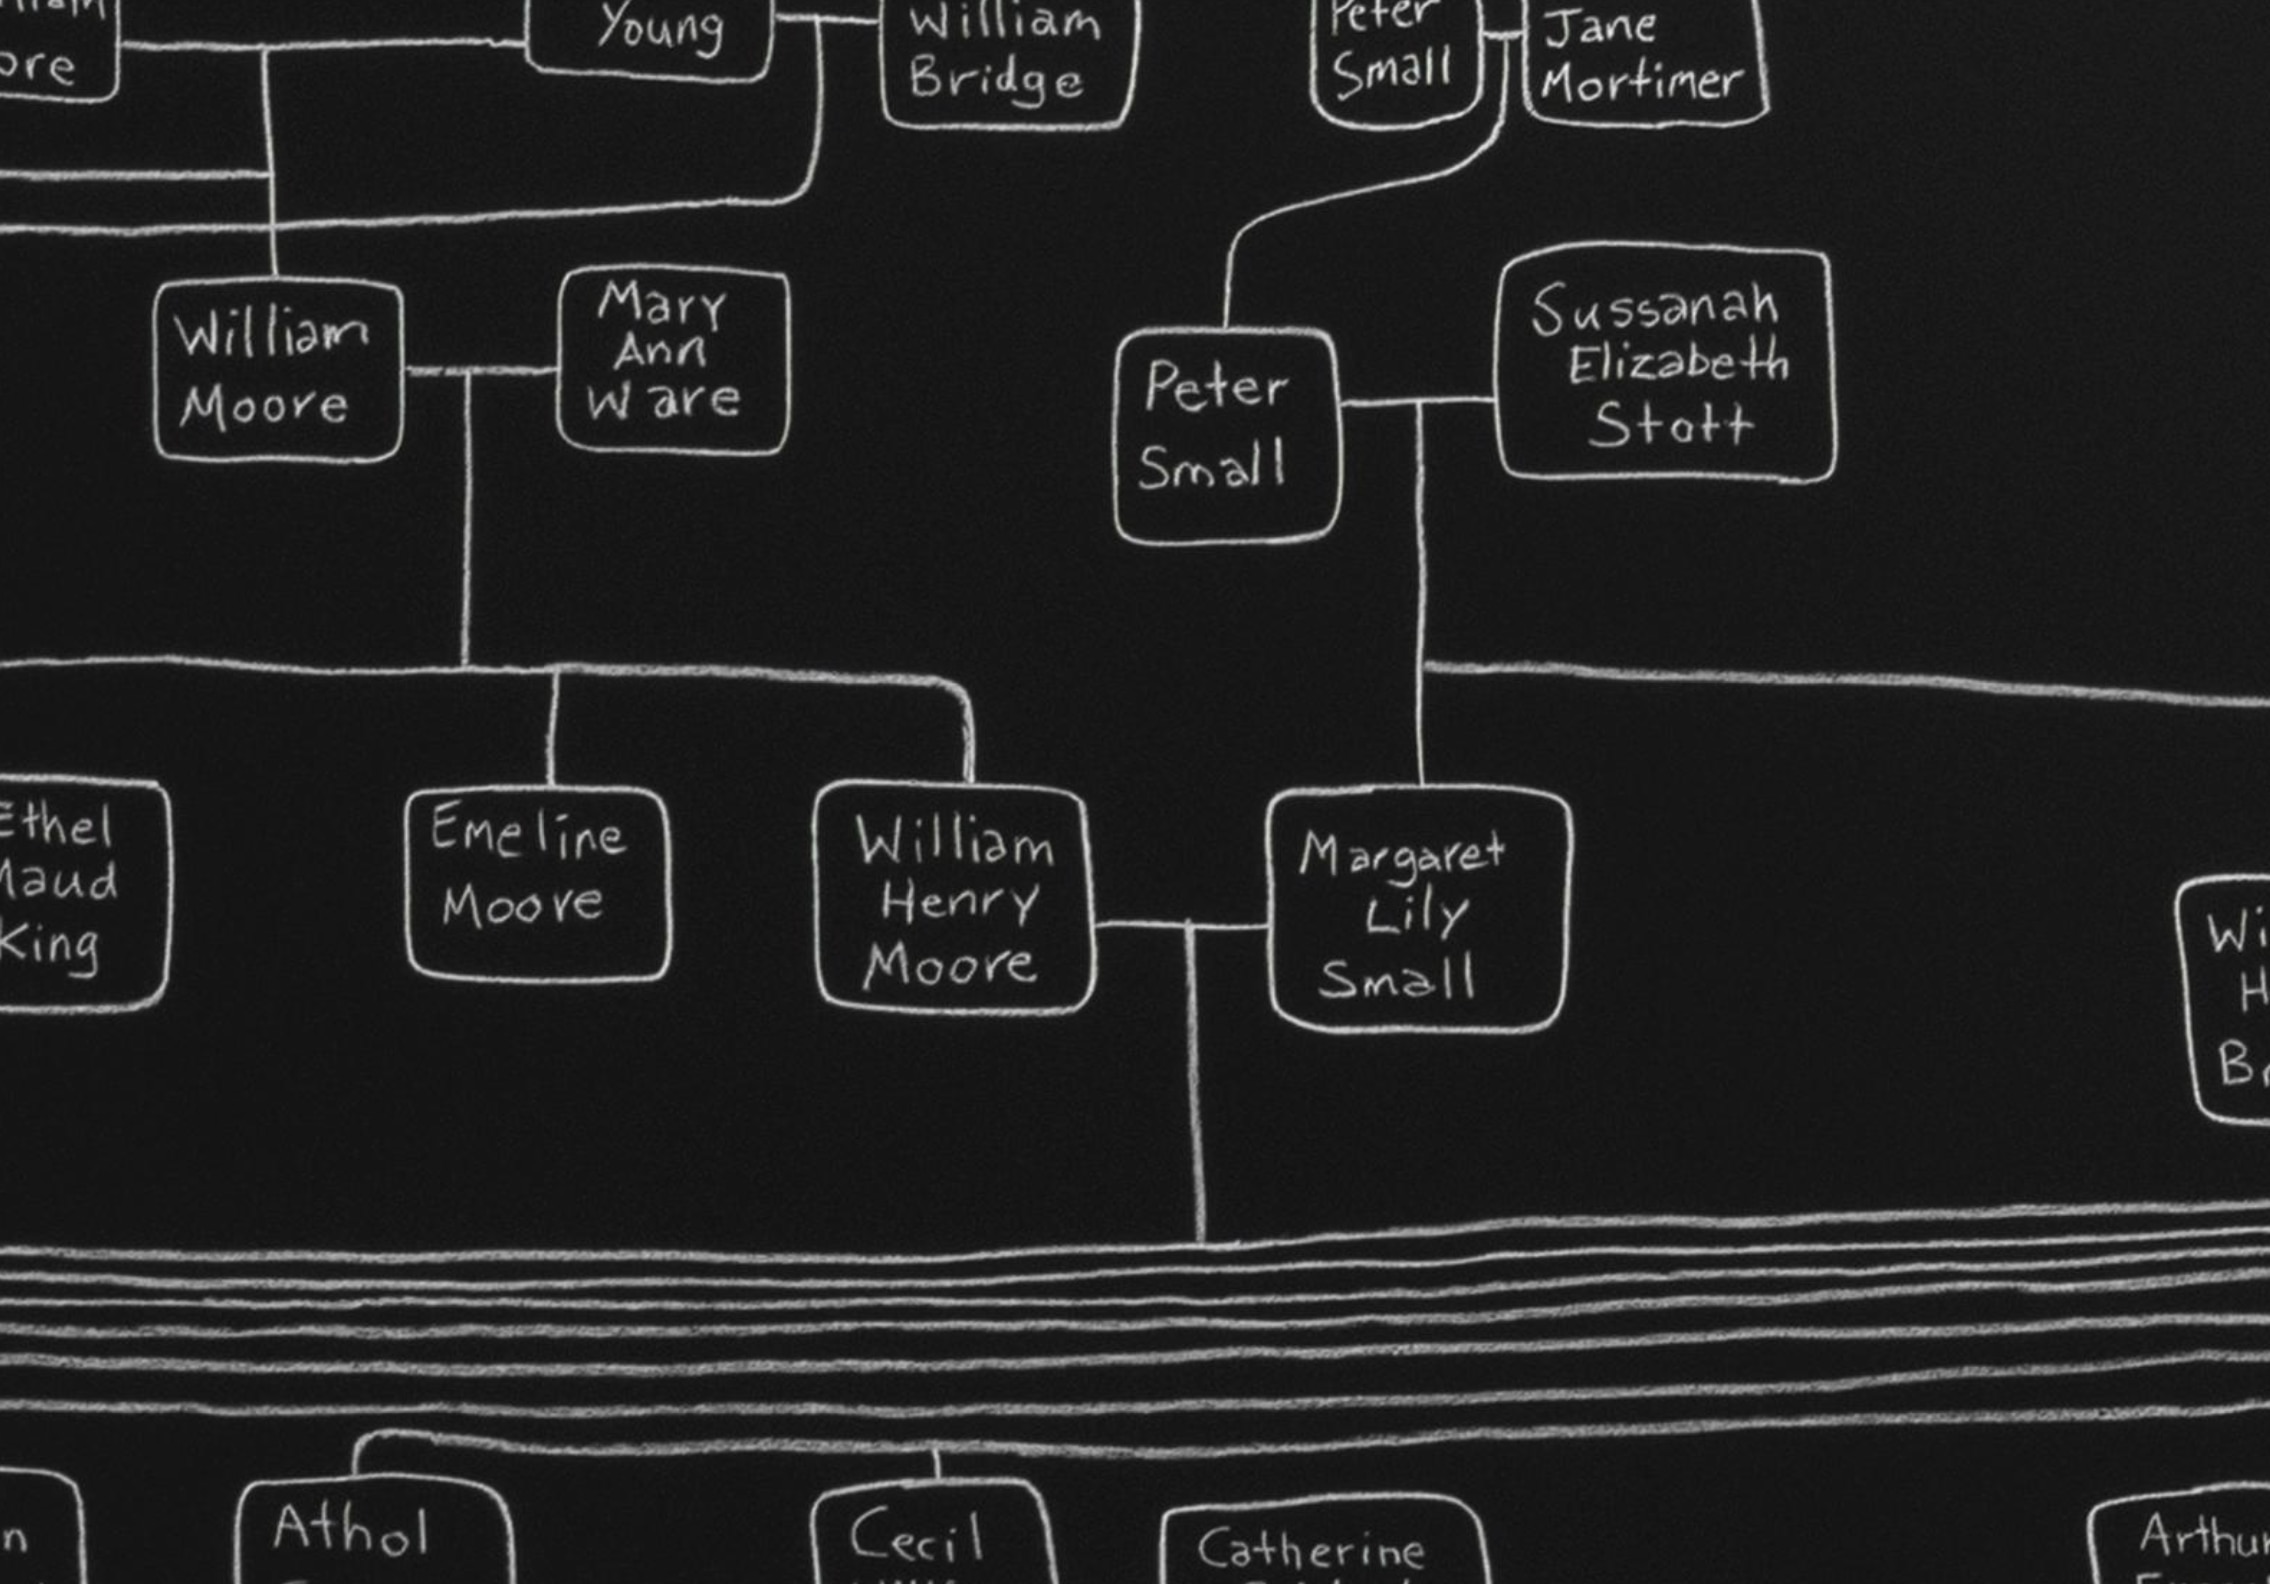 A chalk drawing of a family tree shows the name William Henry Moore.